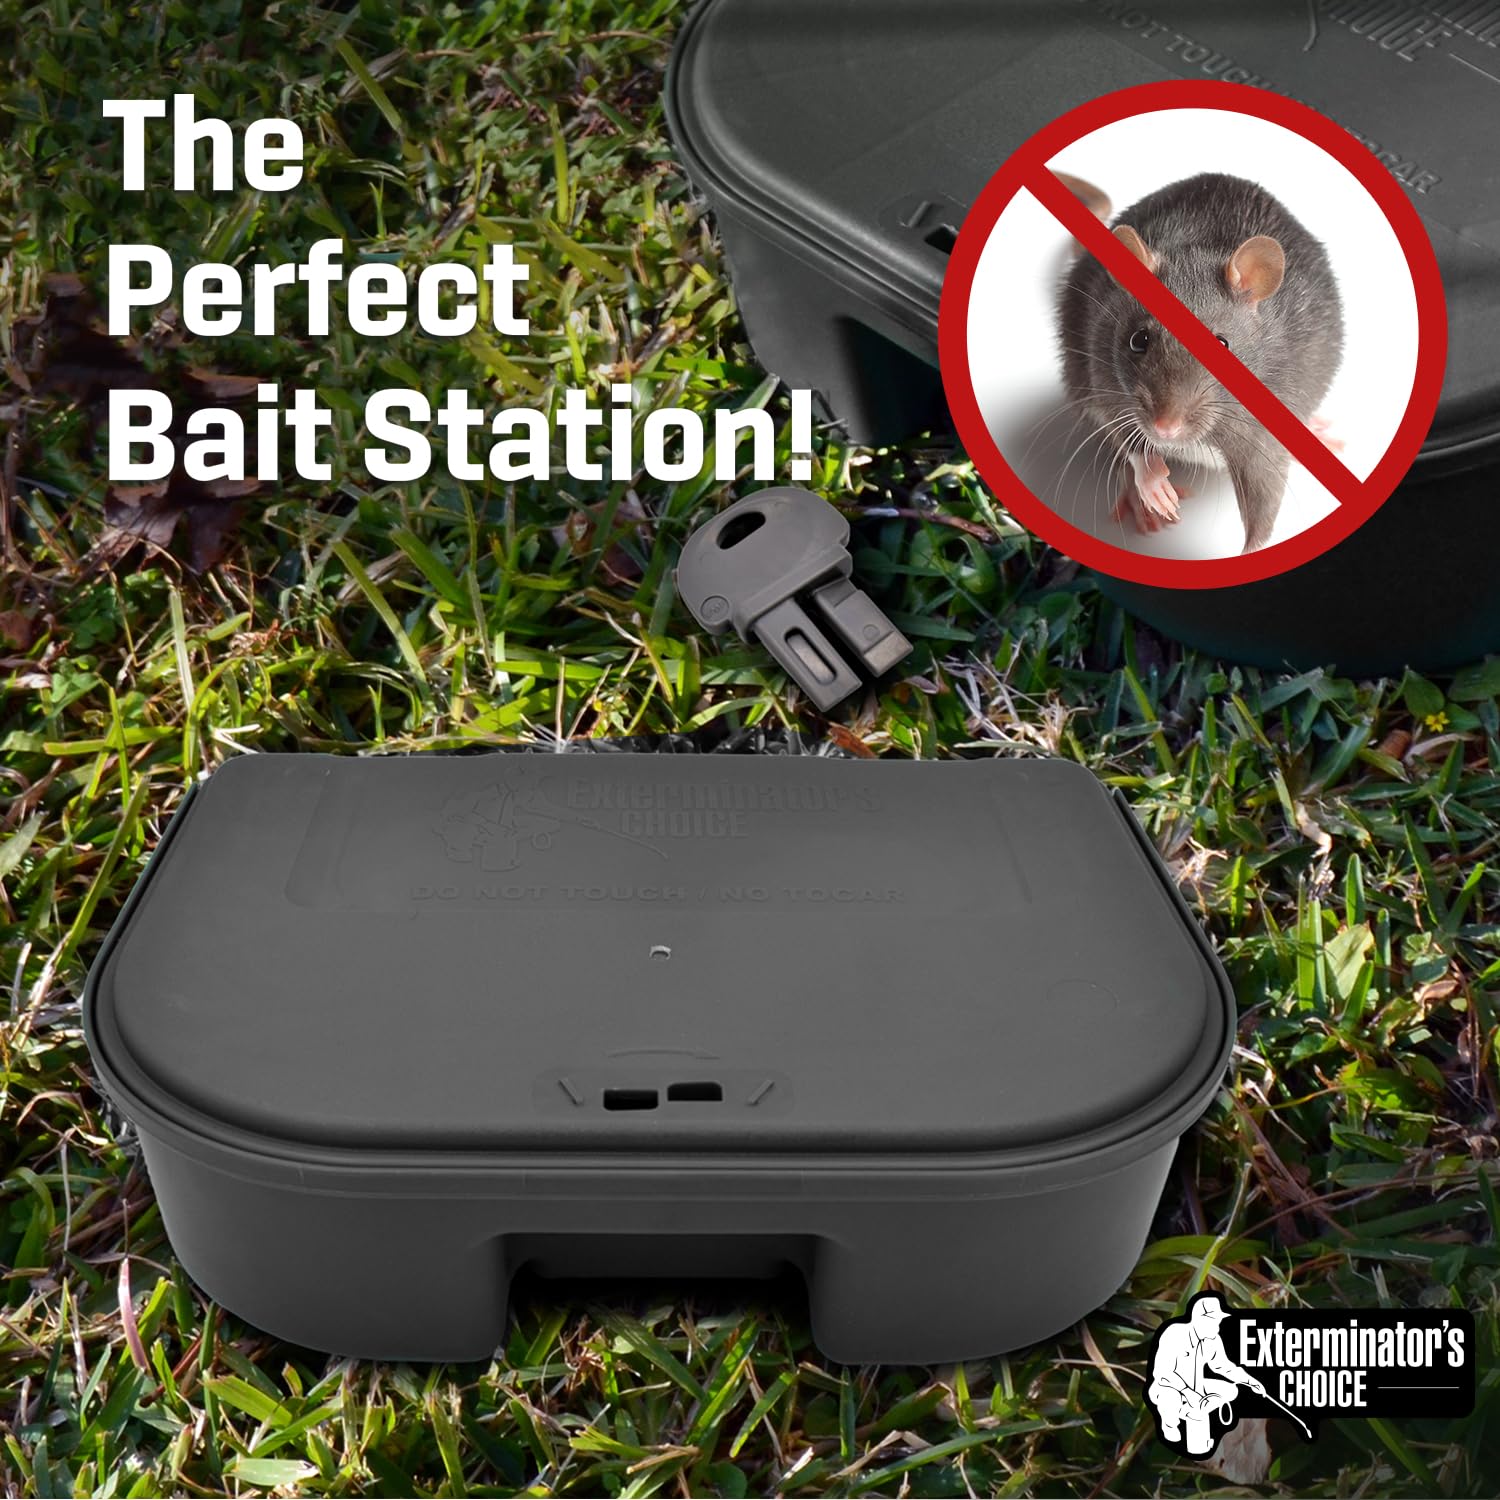 Exterminator’s Choice - Mice Bait Station - Includes Six Small Bait Station and One Key - Heavy Duty Bait Box - Durable and Discreet